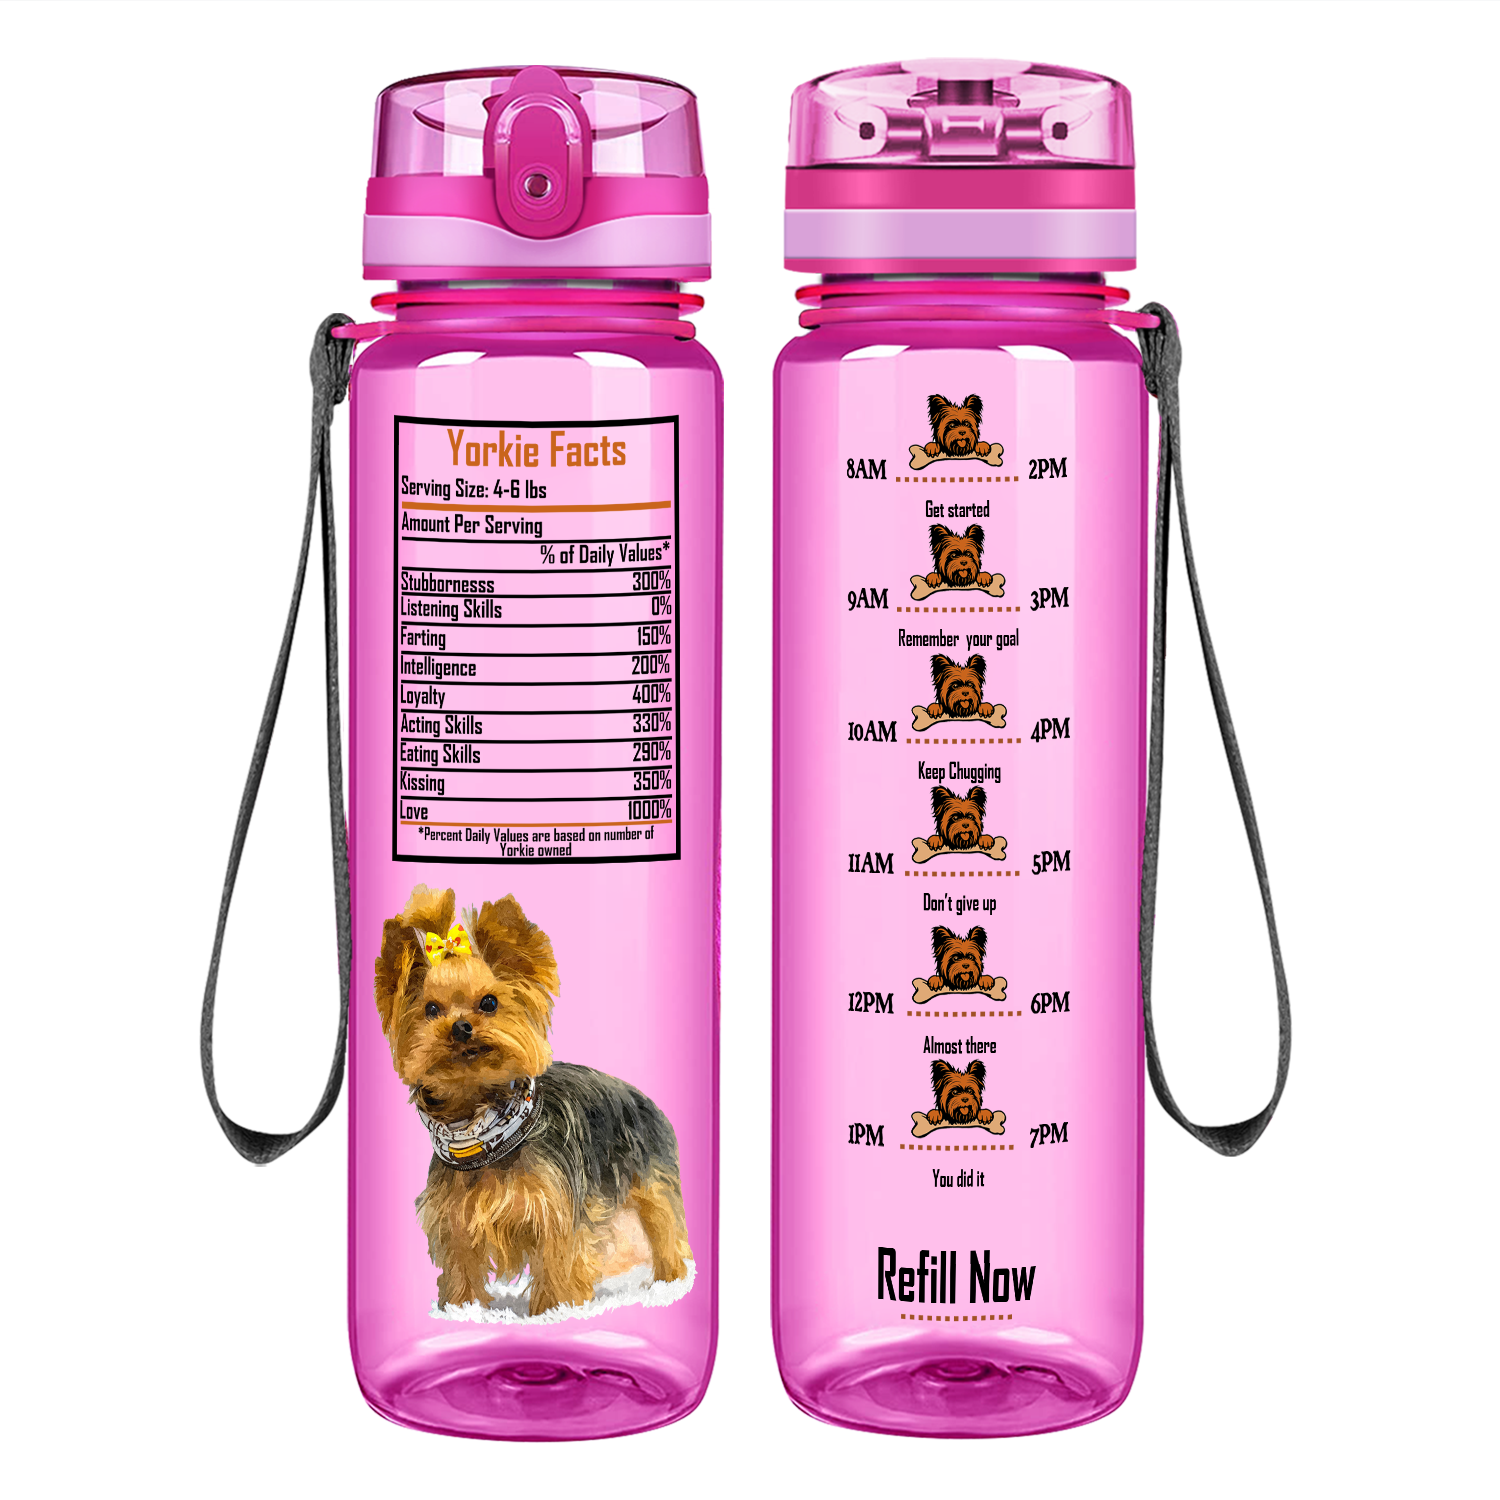 Yorkie Facts on 32 oz Motivational Tracking Water Bottle